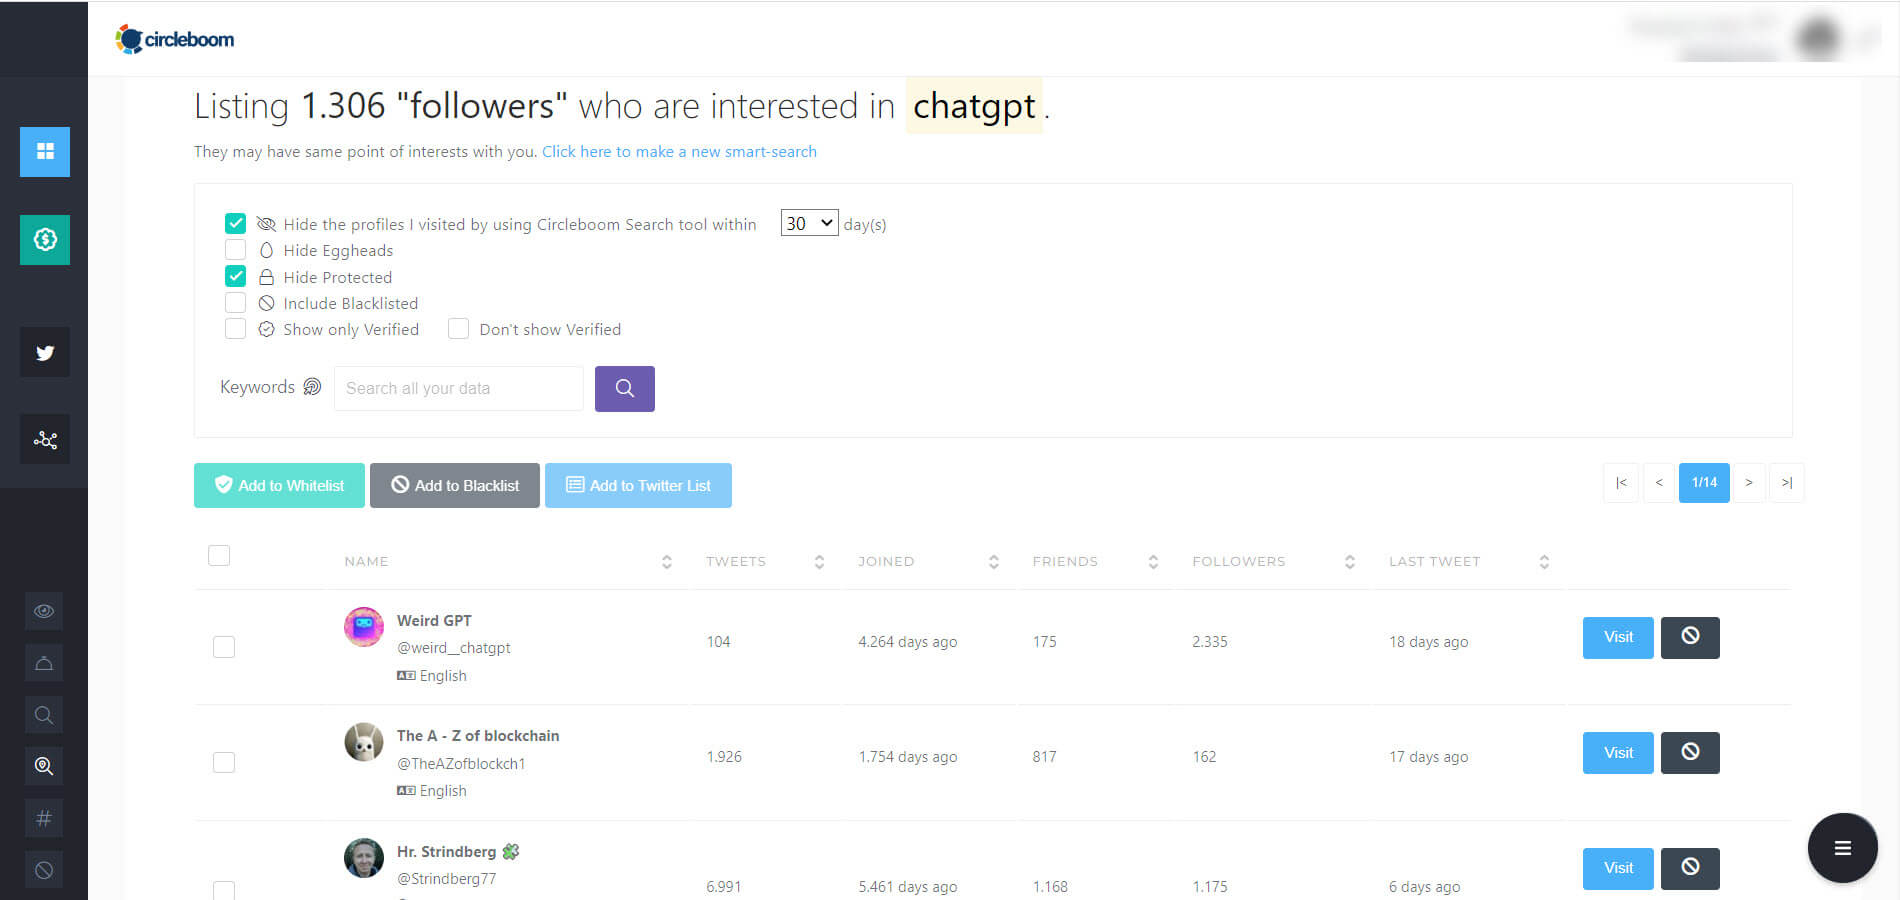 Get the list of Twitter users who use chatgpt keyword in their Twitter profiles.